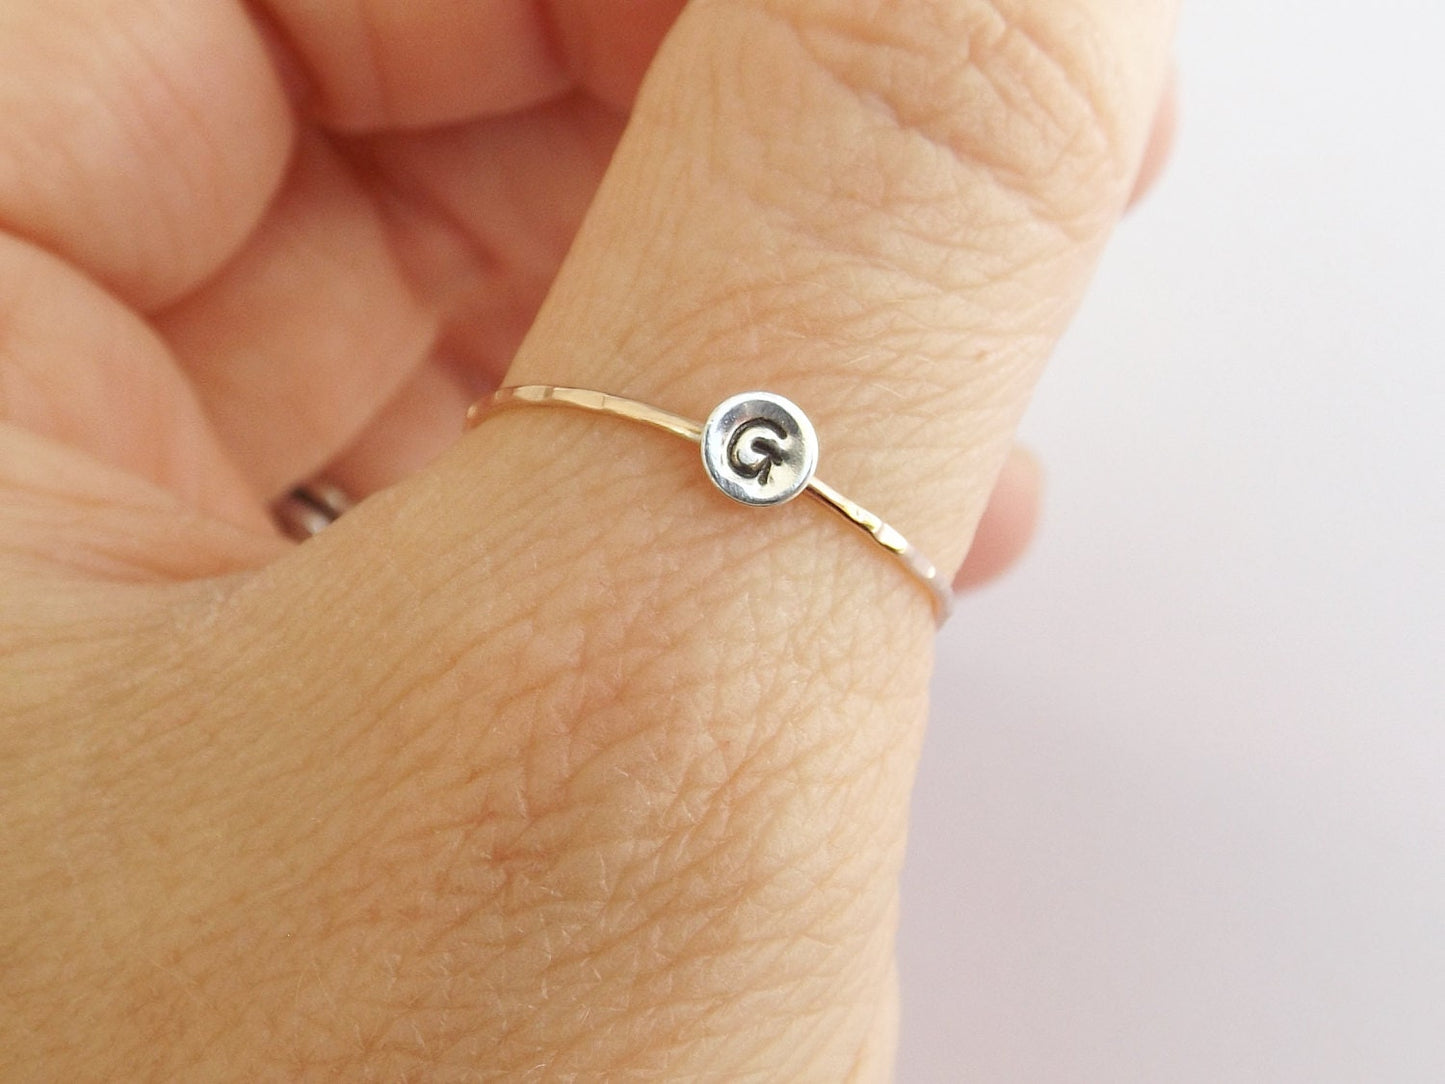 Skinny Initial Stacking Ring, Personalized Ring, Minimalist Ring, Initial Ring, Notched Stacking Ring, Gold Ring, Ring, Couples Rings, Fancy